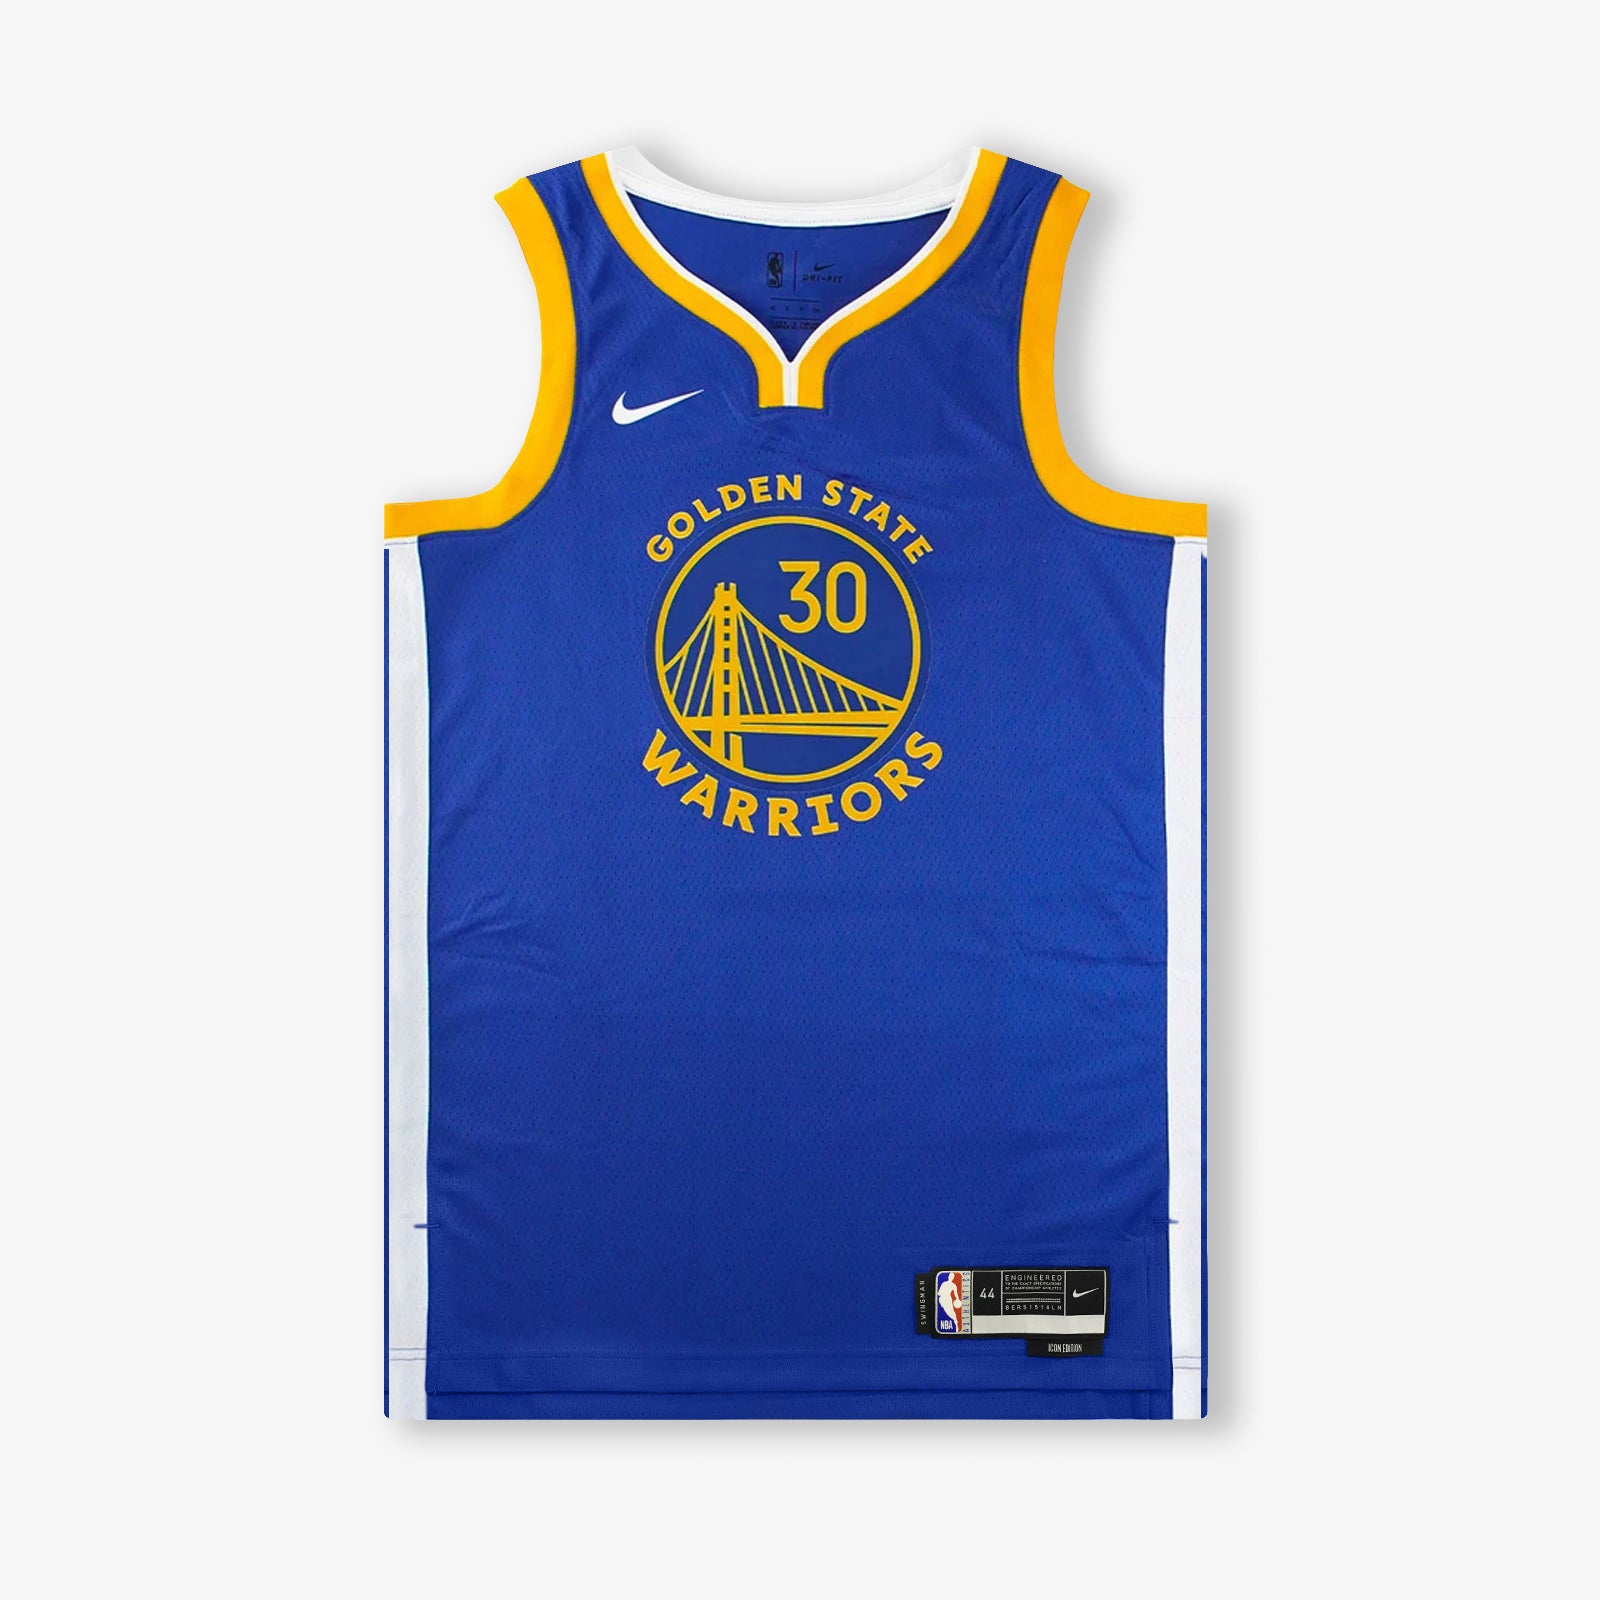 Youth Nike Stephen Curry Blue Golden State Warriors Swingman Jersey - Icon  Edition